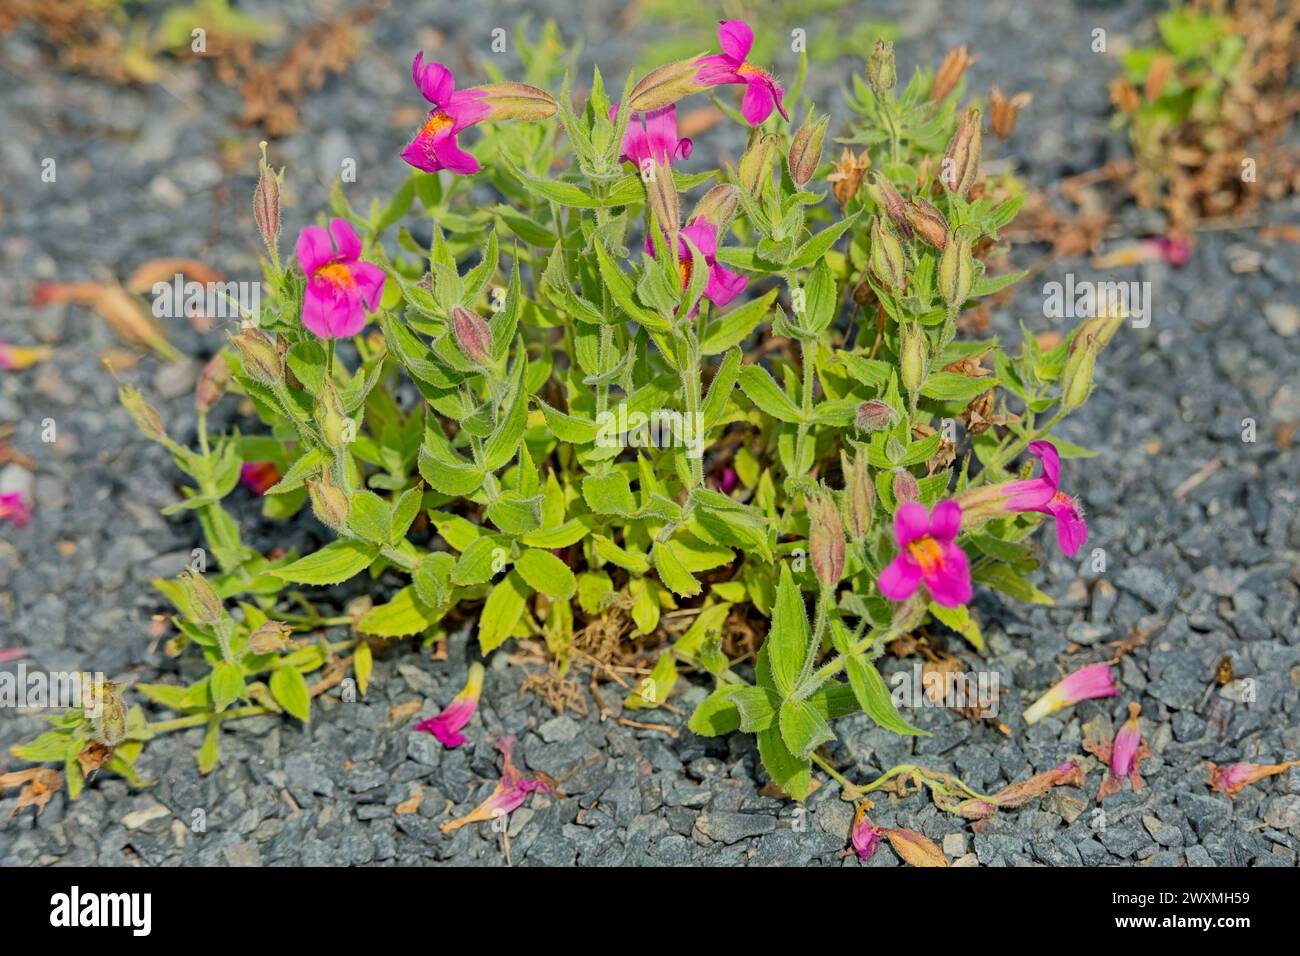 Closeup of Erythranthe lewisii is a perennial plant in the family Phrymaceae. Stock Photo